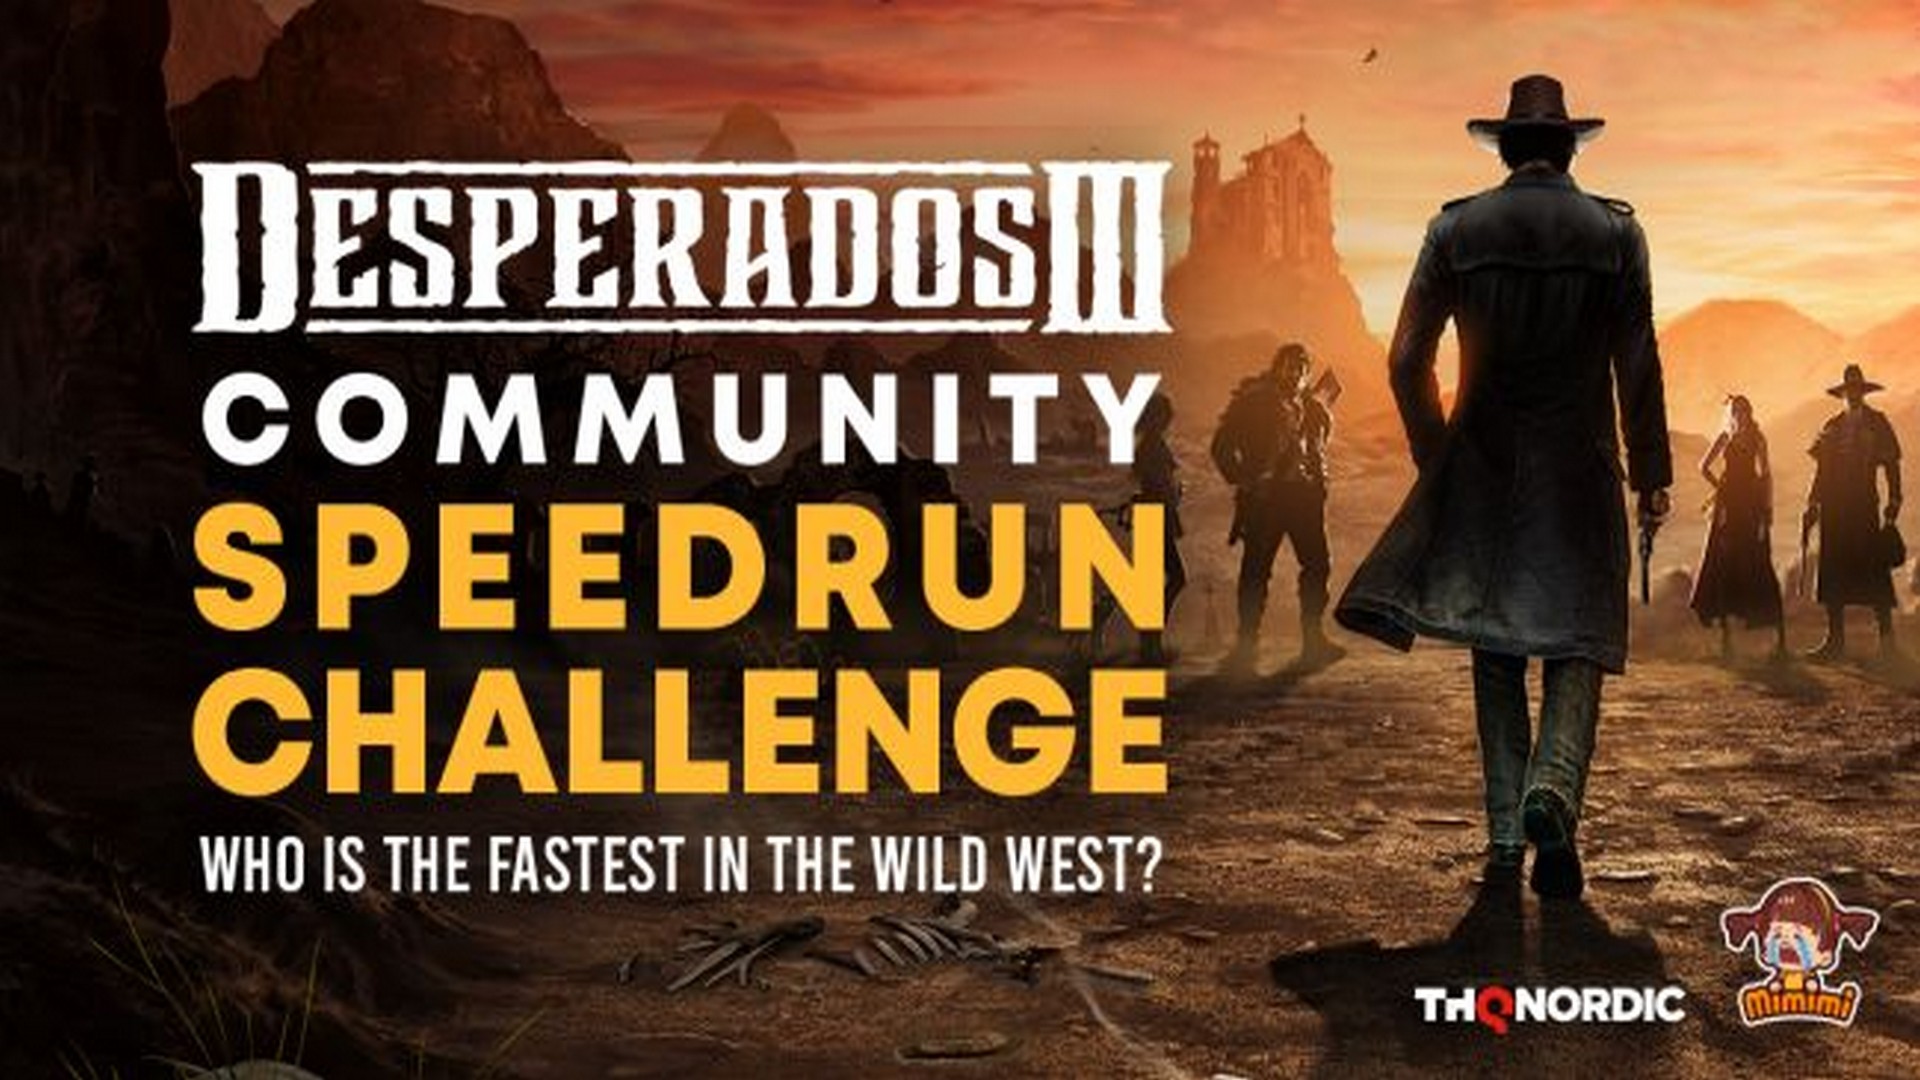 A Cat, a Chicken, a Dog and a Speedrun Contest: Another Free Update for Desperados III